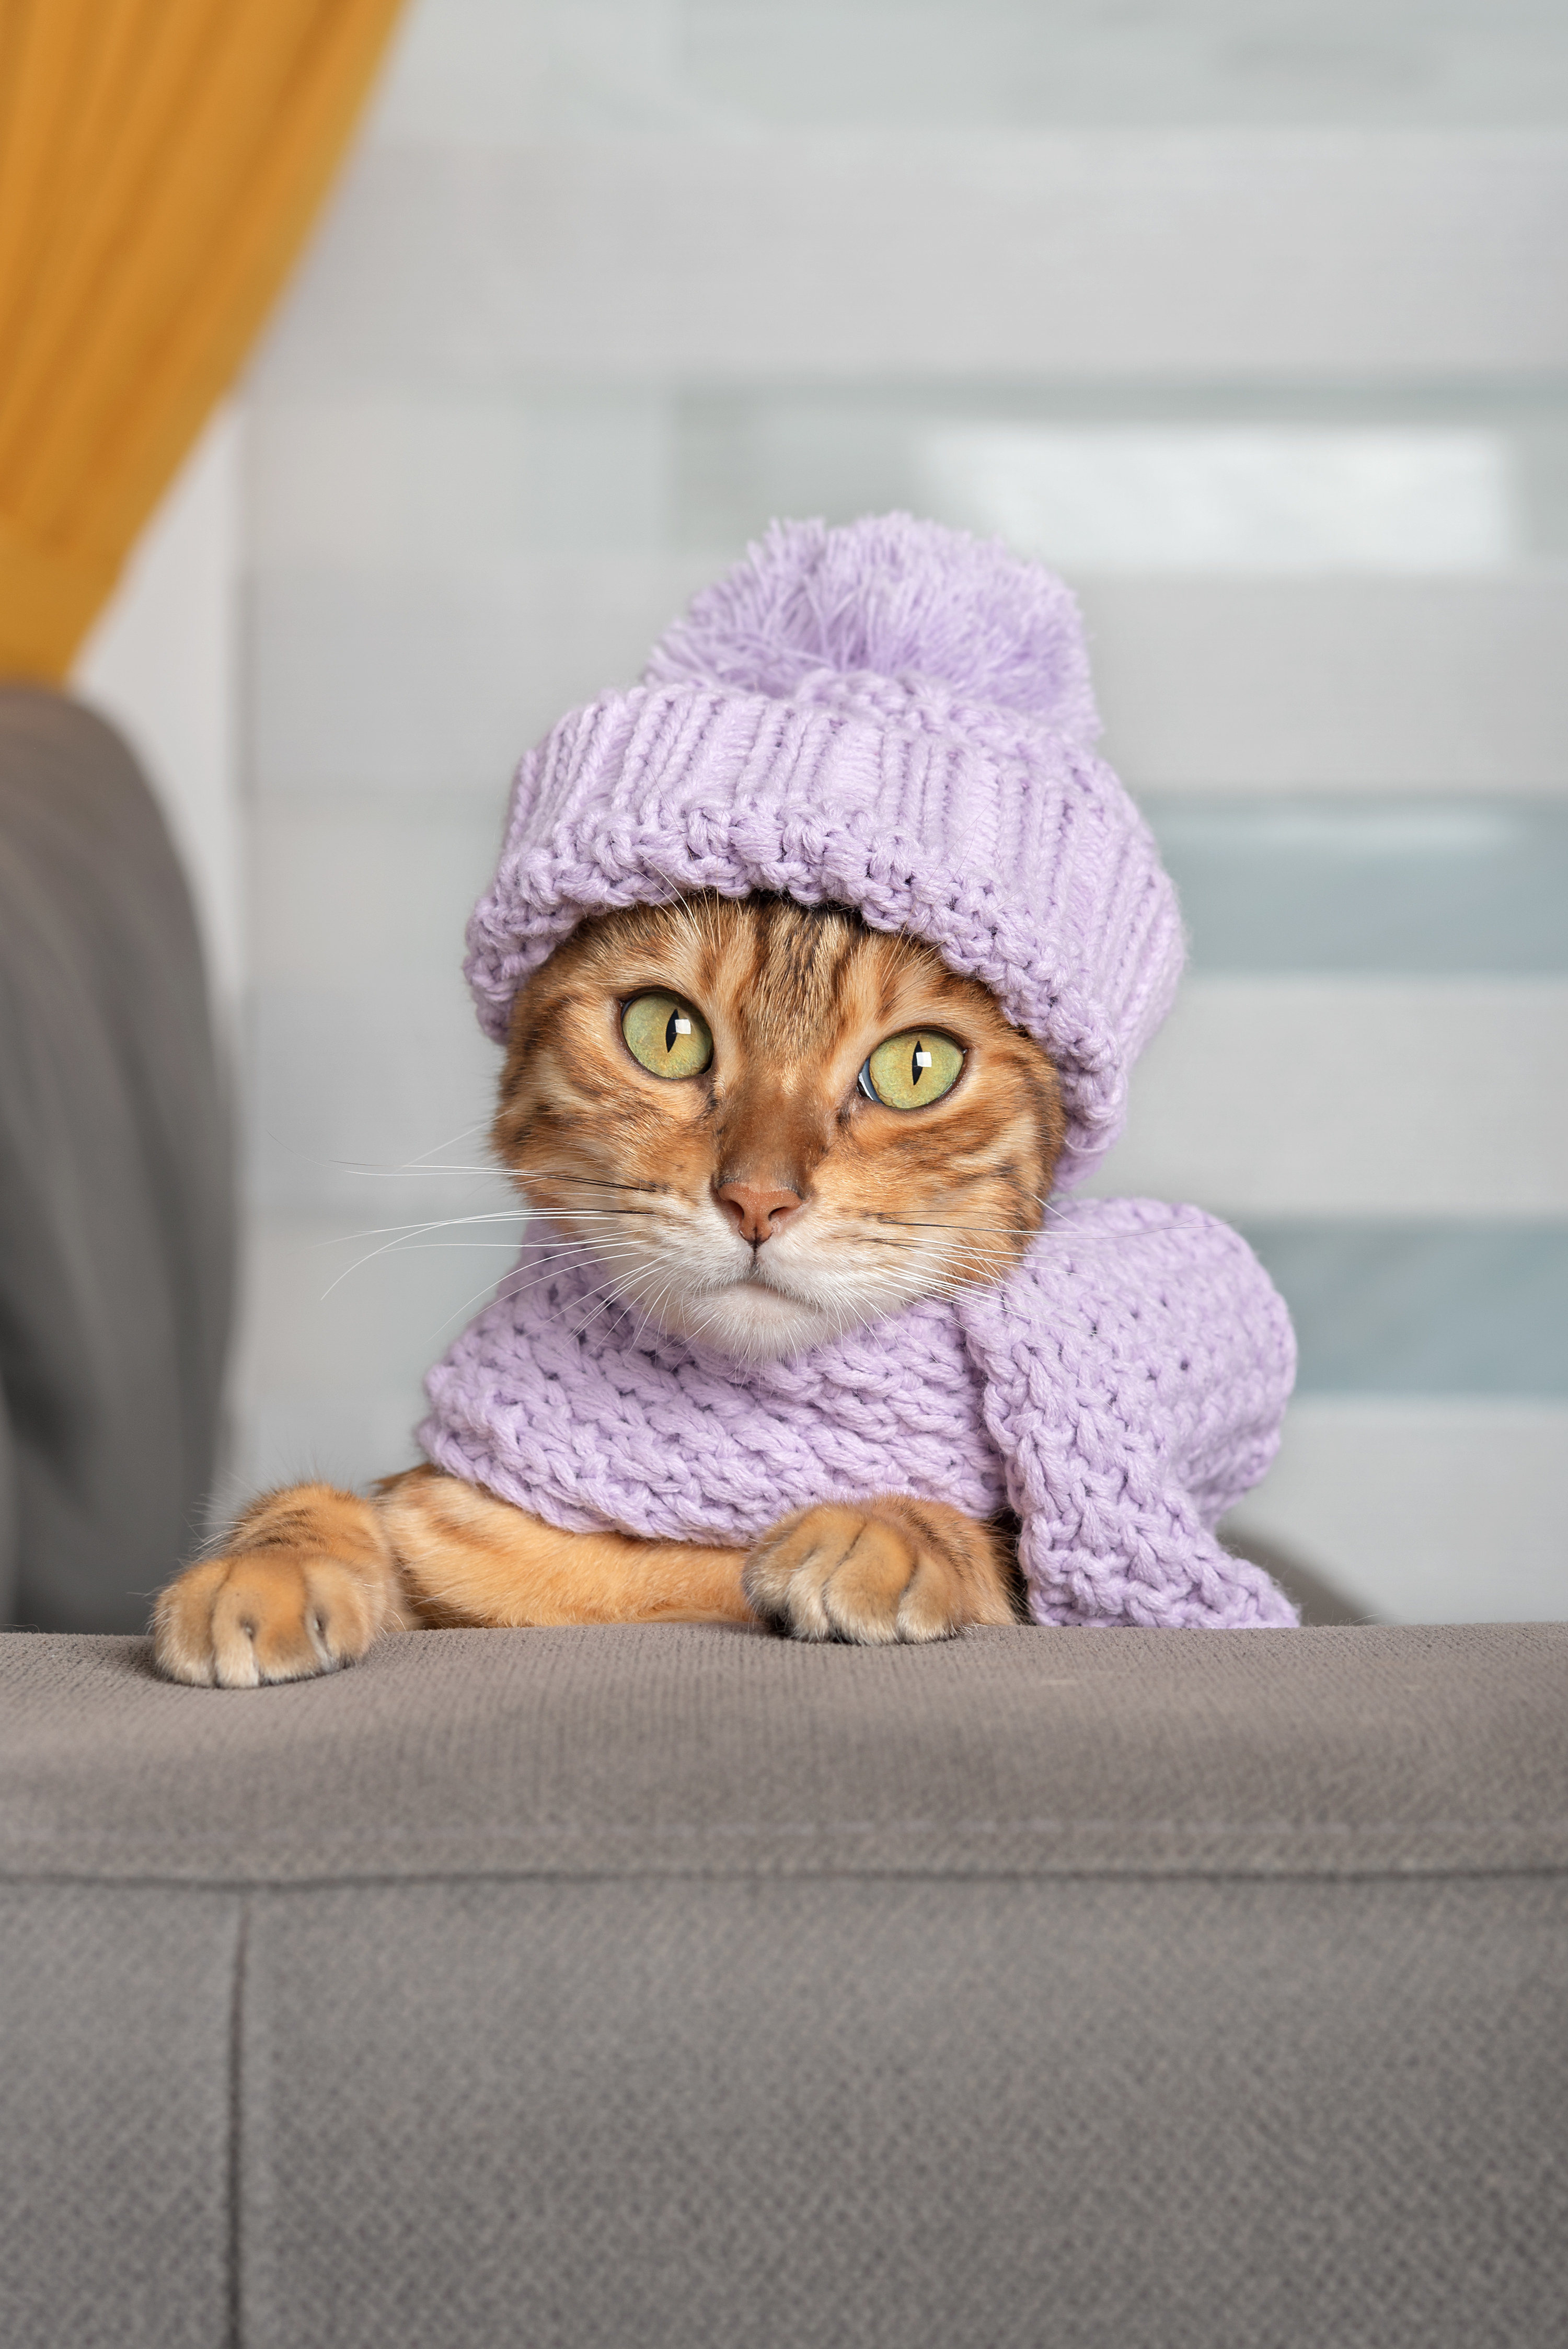 Domestic red cat in a knitted hat and scarf